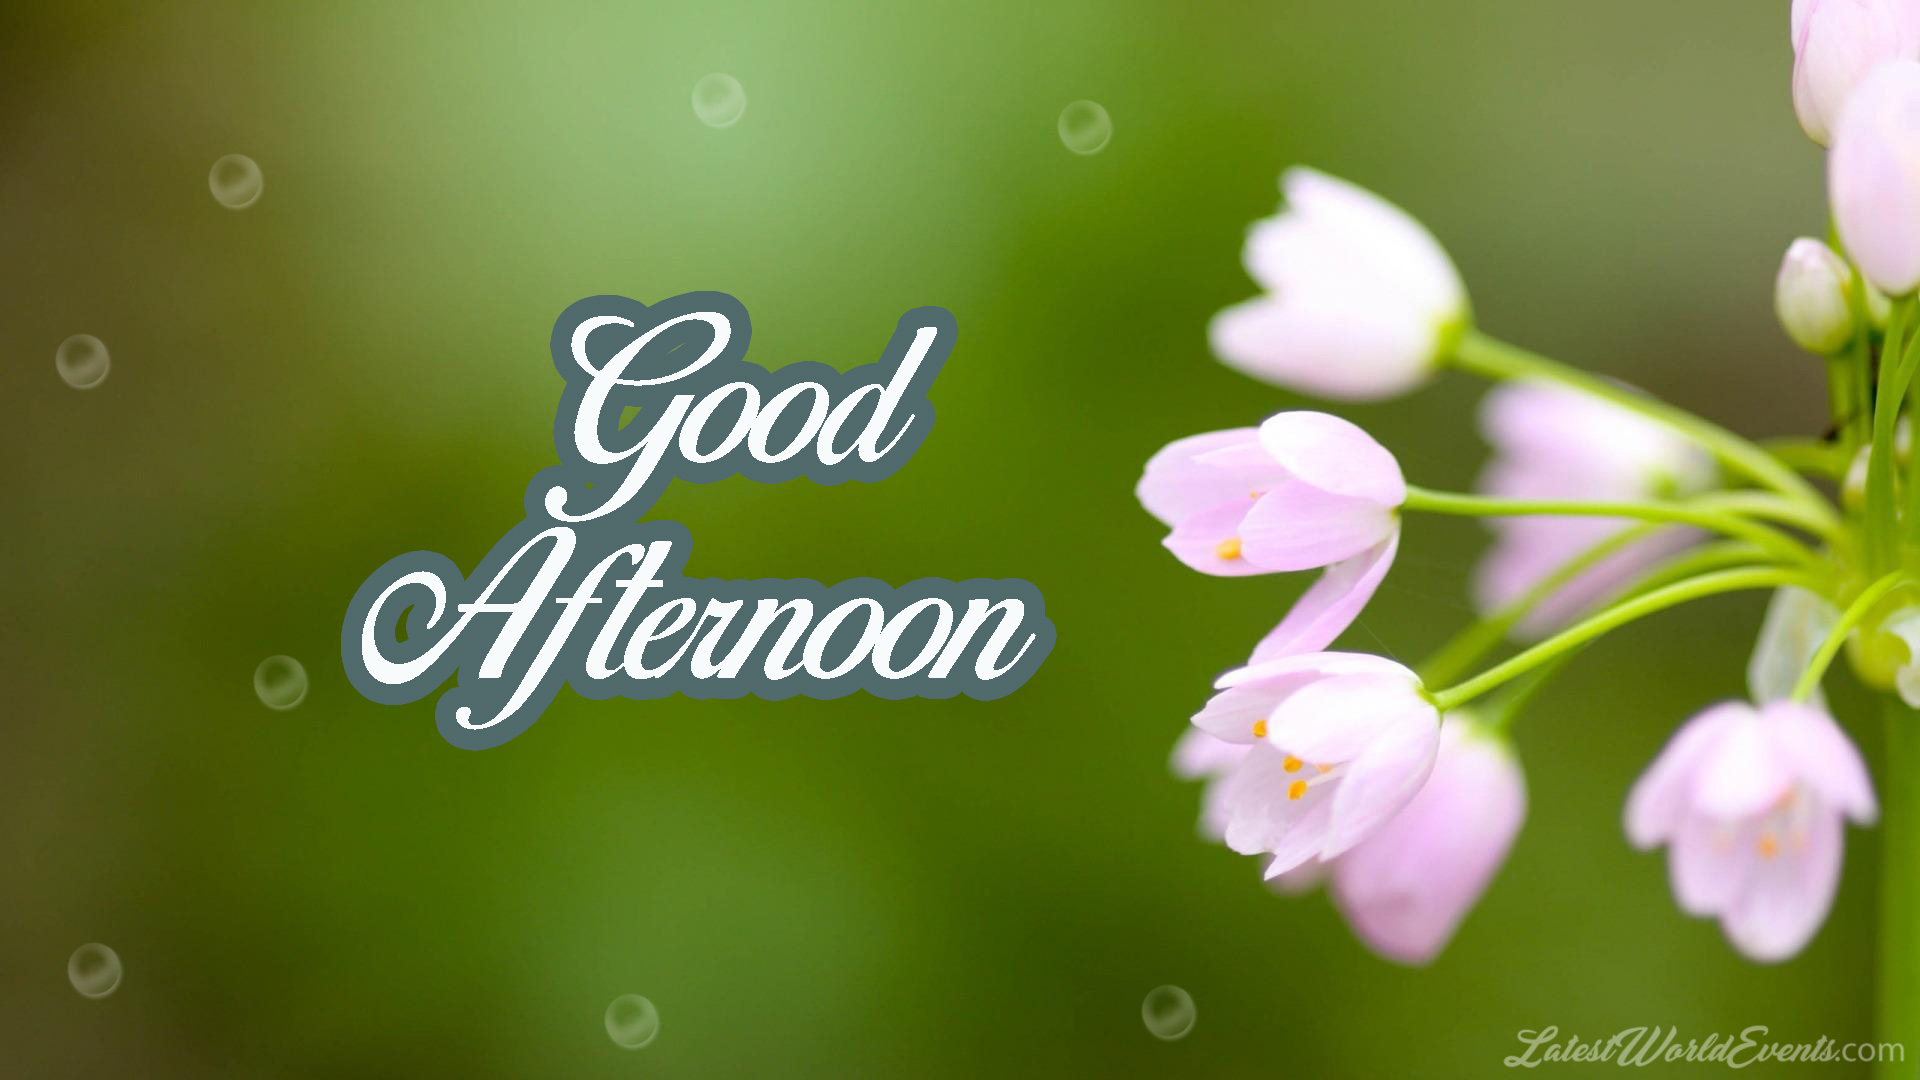 good-afternoon-images-cards-wishes